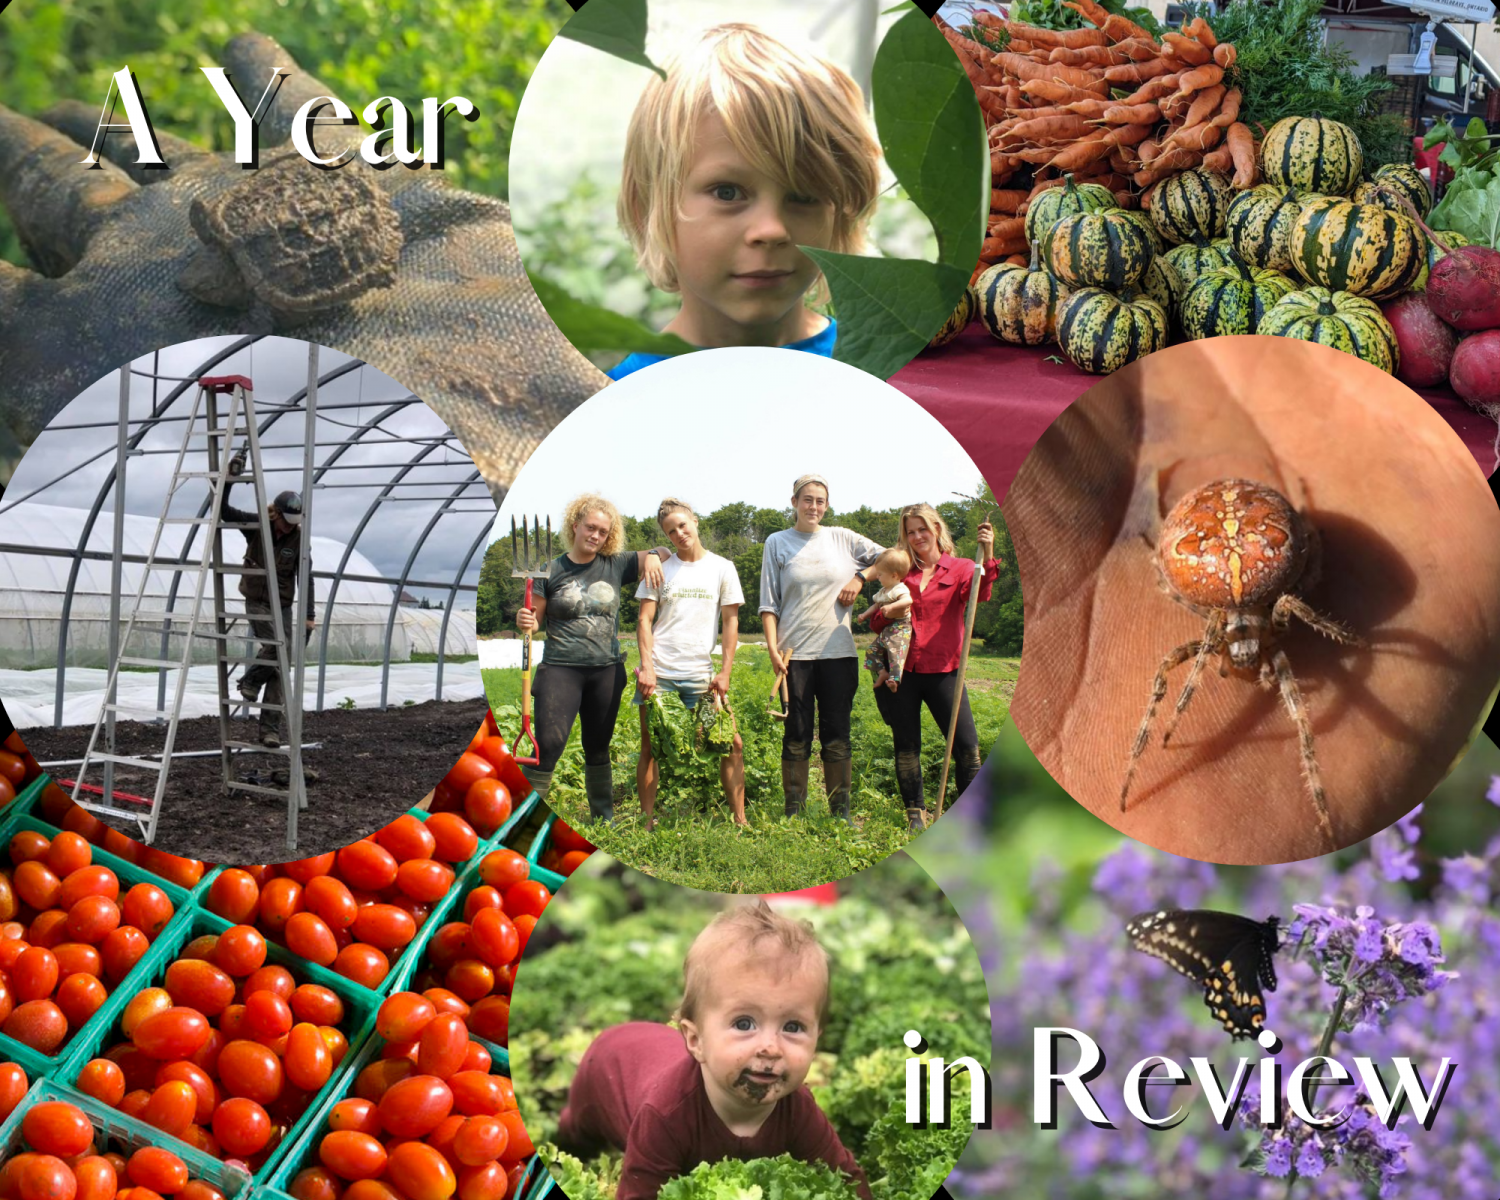 Lettuce Rejoice! December 9, 2021- A Year in Review